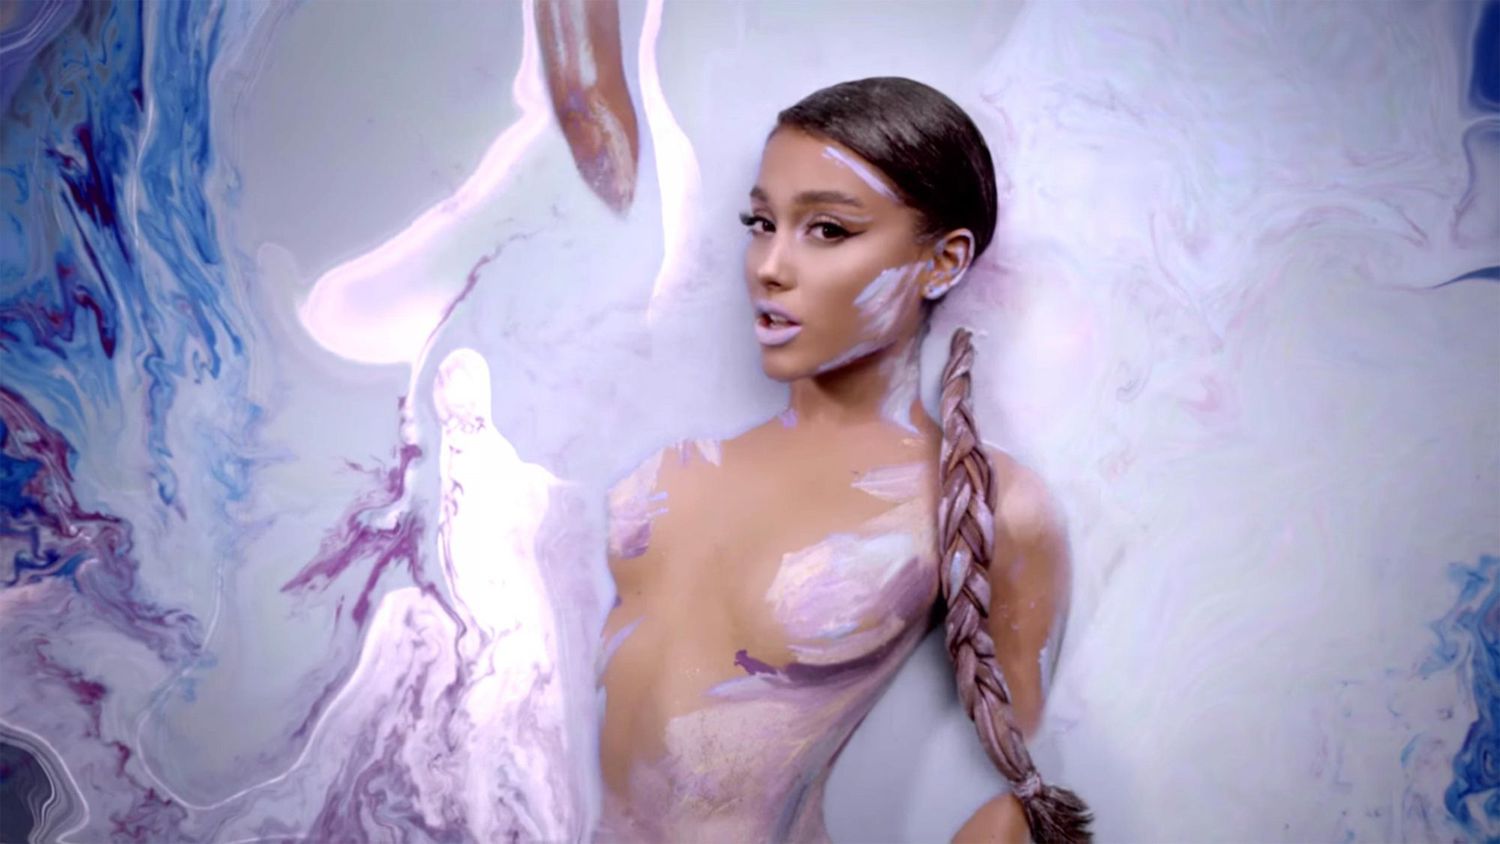 brian steffen recommends has ariana grande nude pic